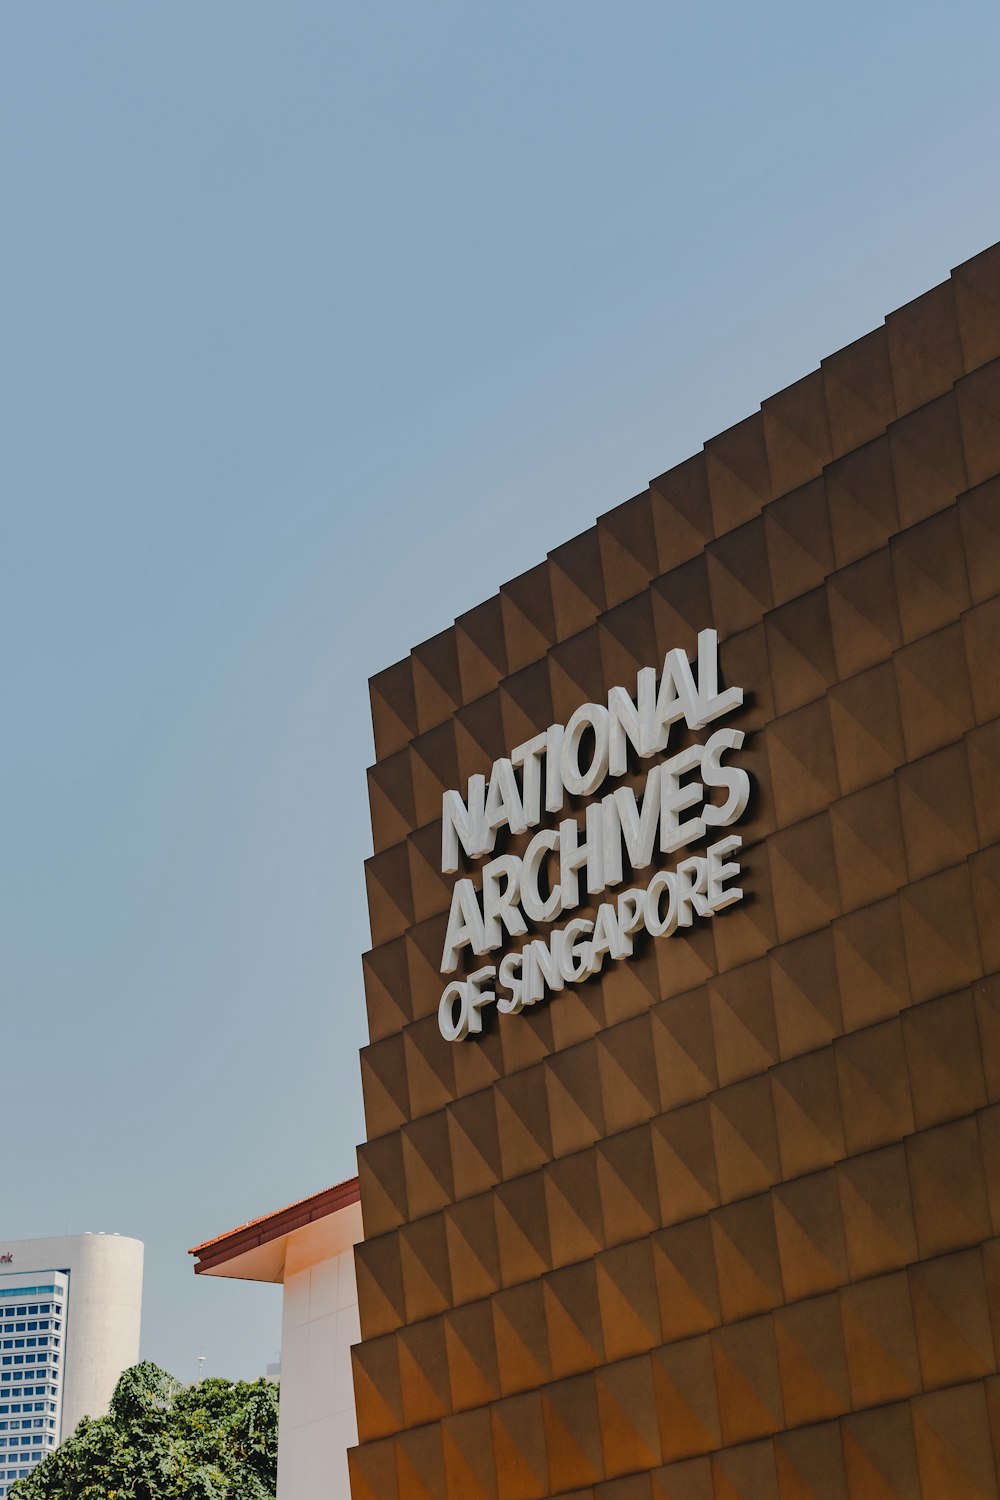 the national archives of singapore sign on the side of a building